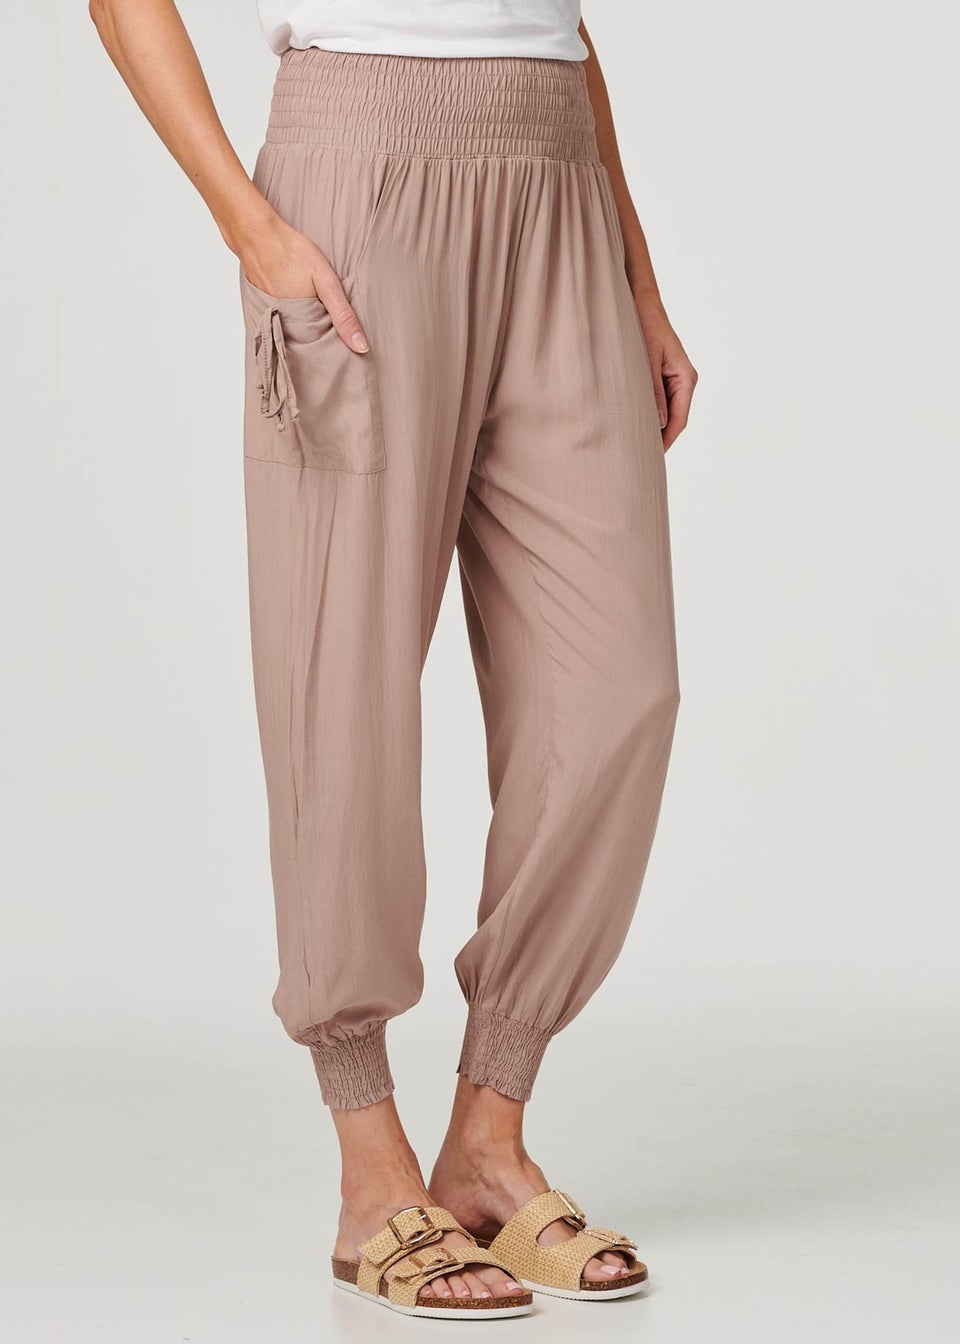 Izabel London Brown High Waist Pull On Tapered Pants